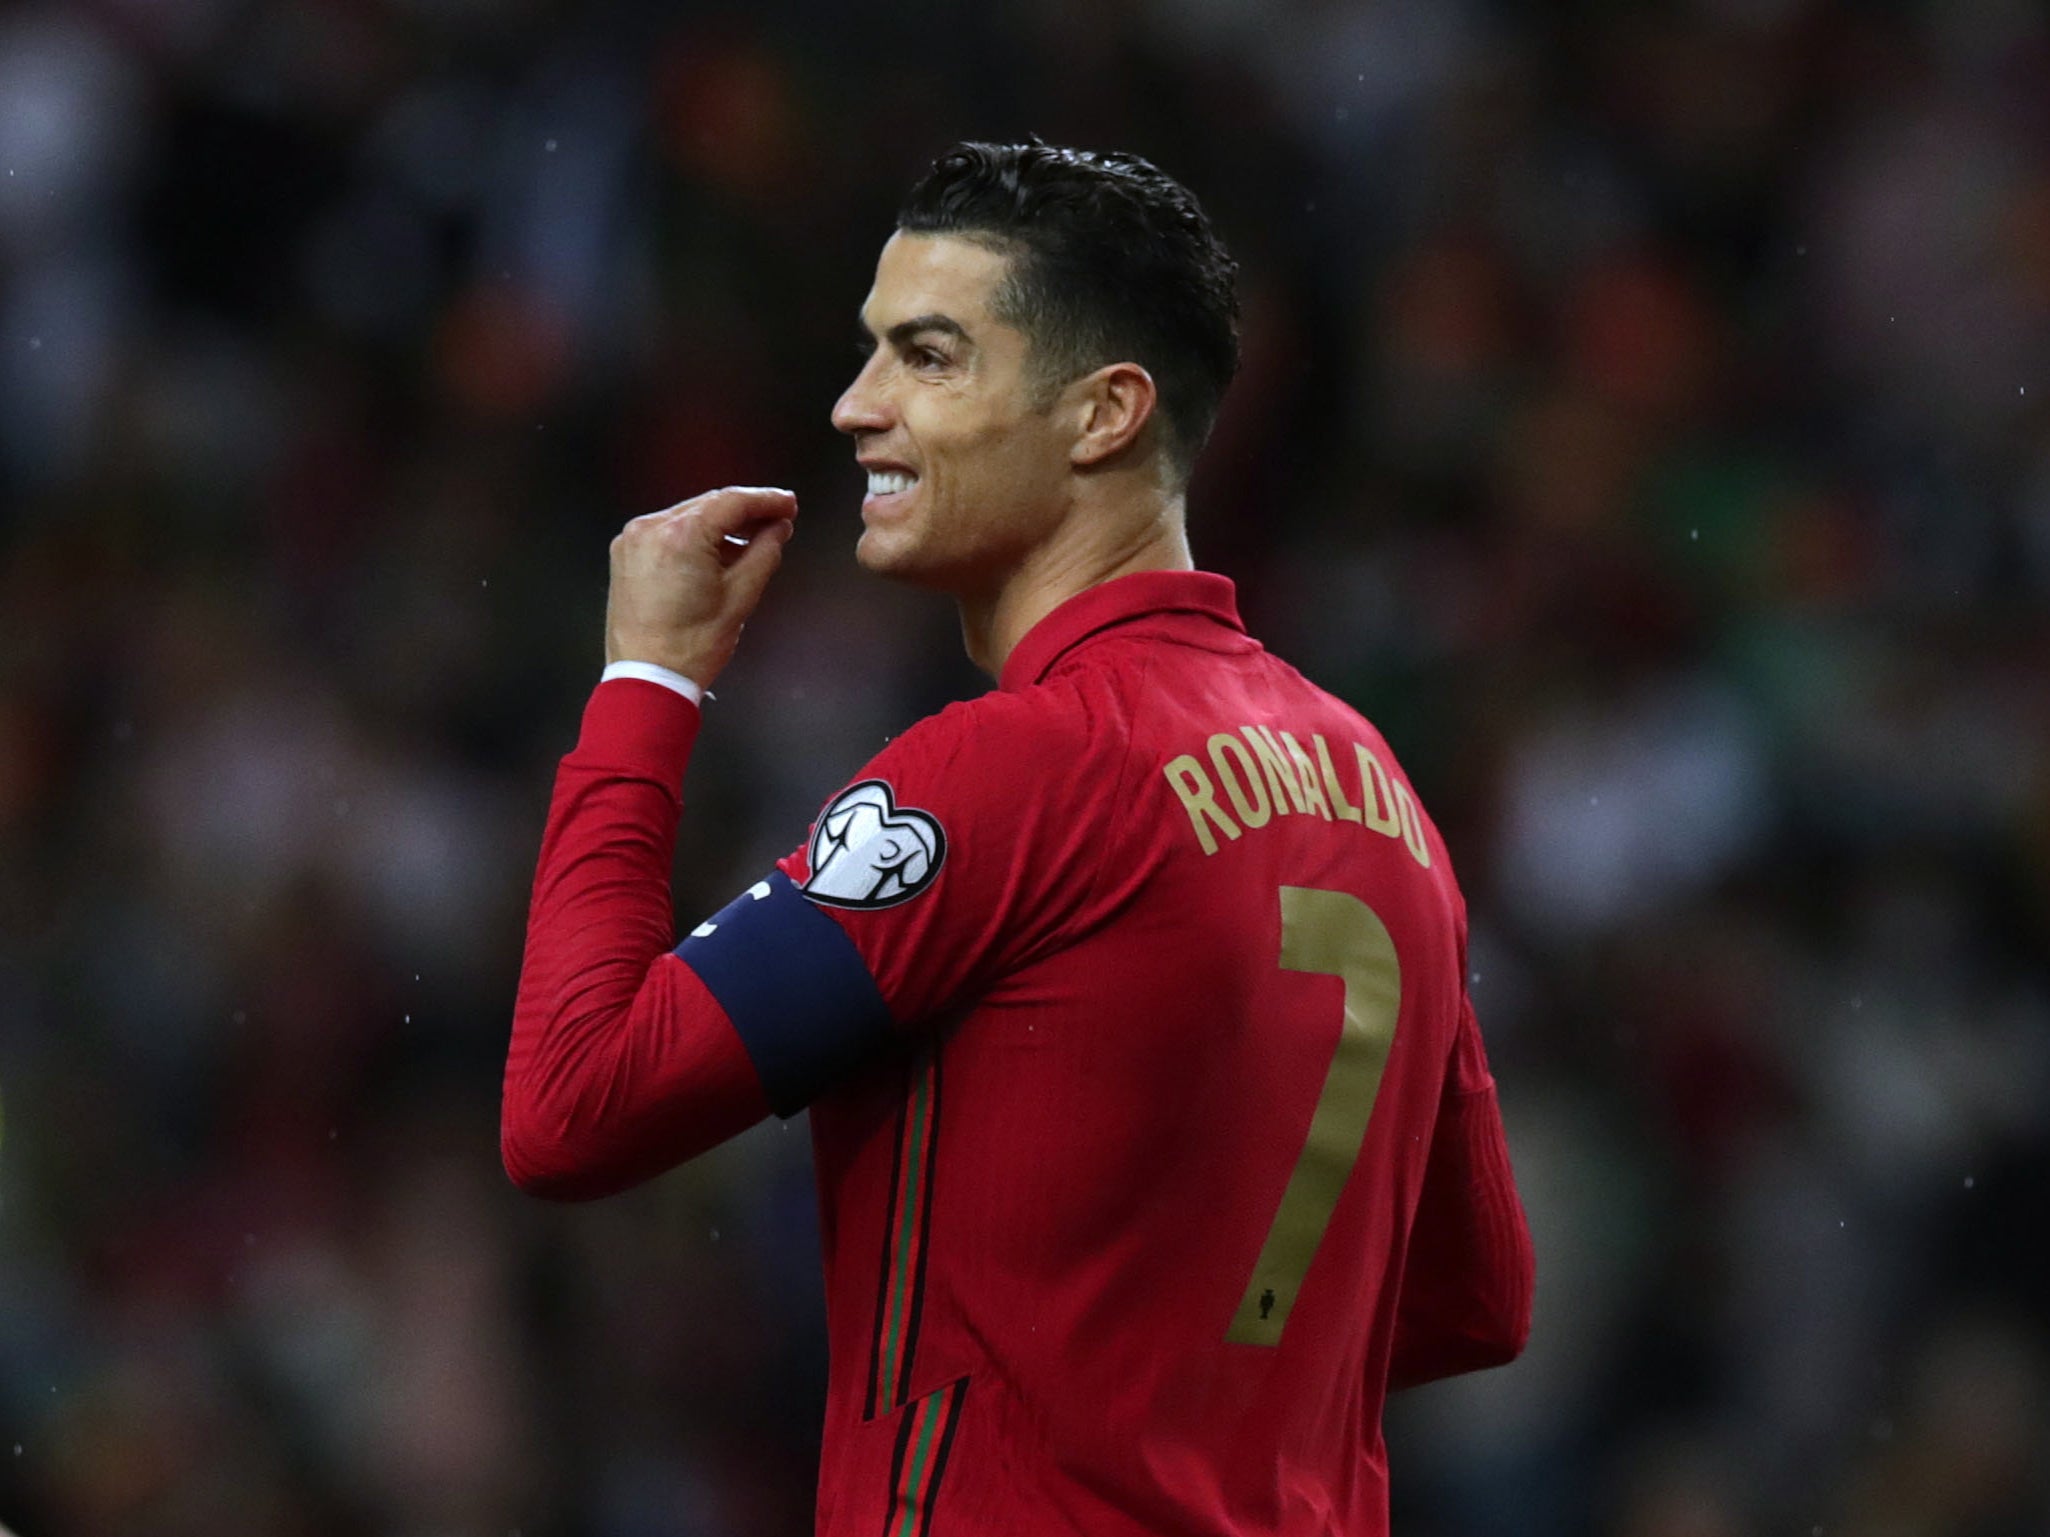 Ronaldo is desperate to reach one final World Cup